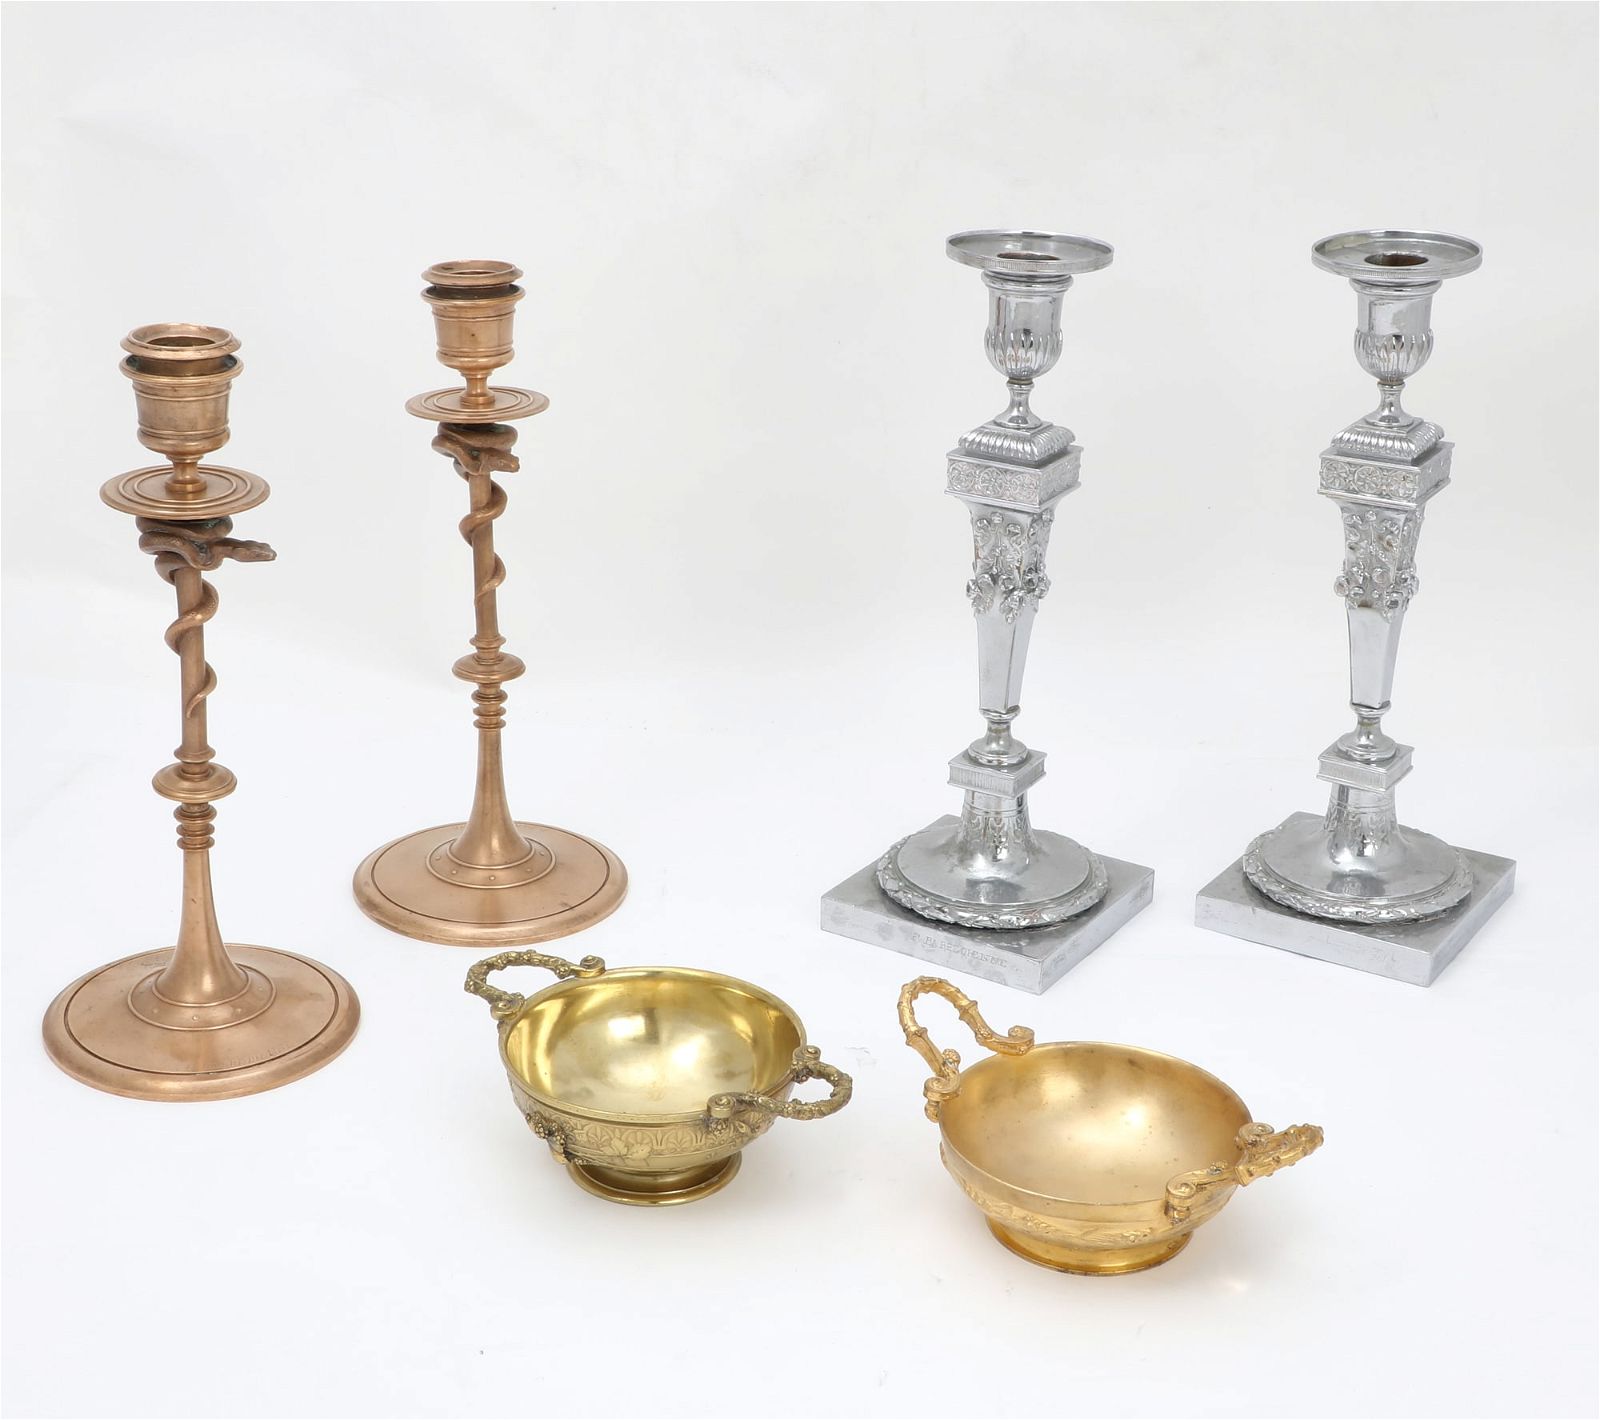 SIX FRENCH METALWARE TABLE ARTICLES  2fb3495